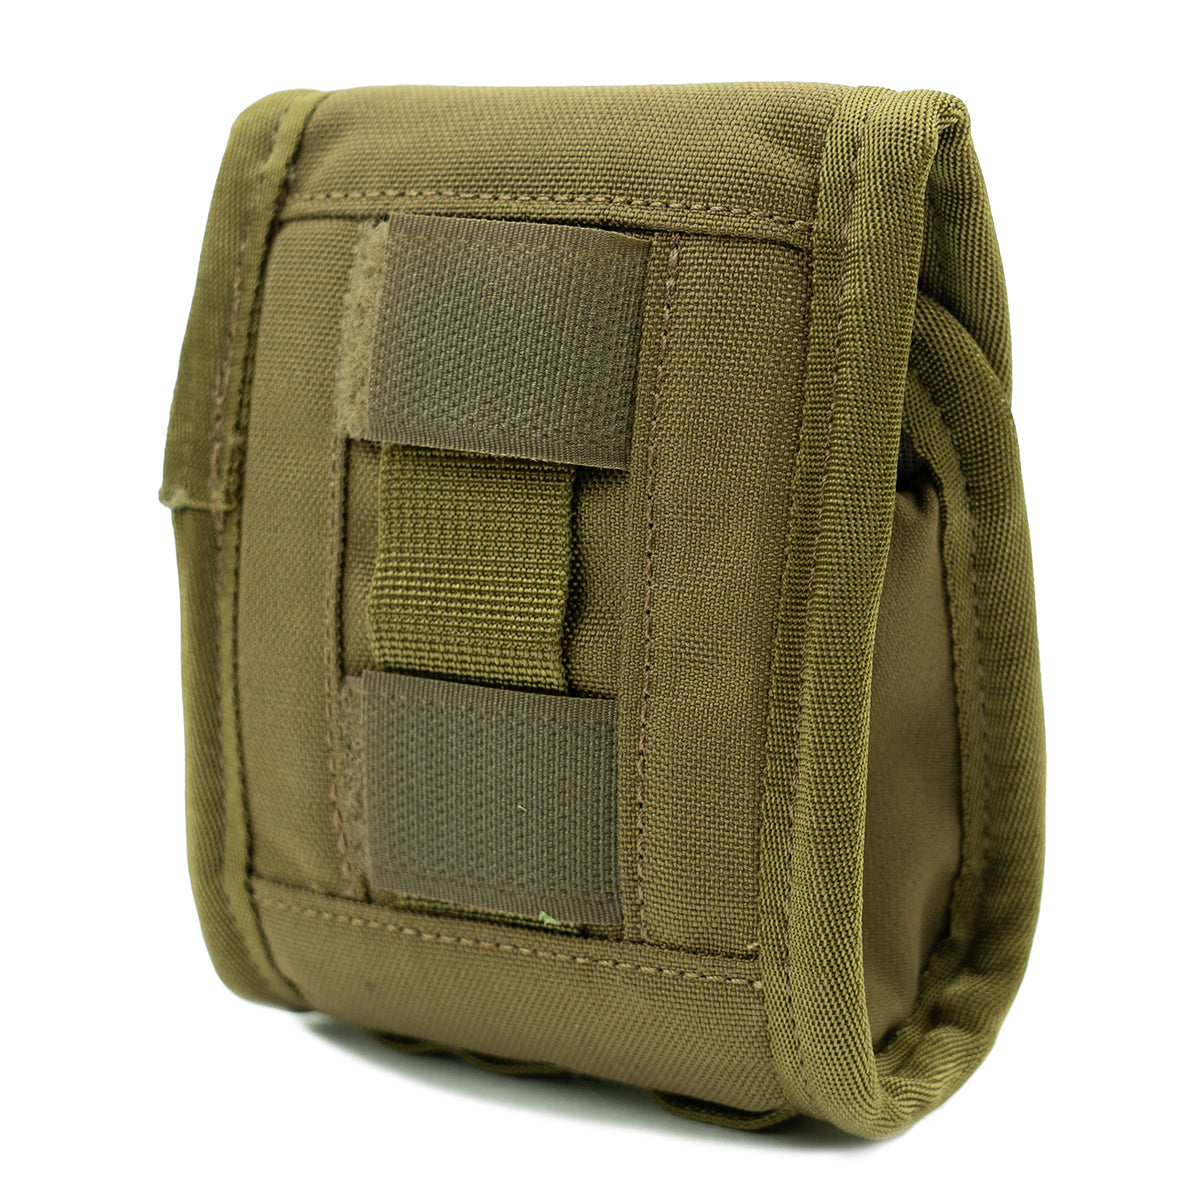 Mystery Ranch Quick Draw Rangefinder Pouch in Mystery Ranch Quick Draw Rangefinder Pouch by Mystery Ranch | Optics - goHUNT Shop by GOHUNT | Mystery Ranch - GOHUNT Shop